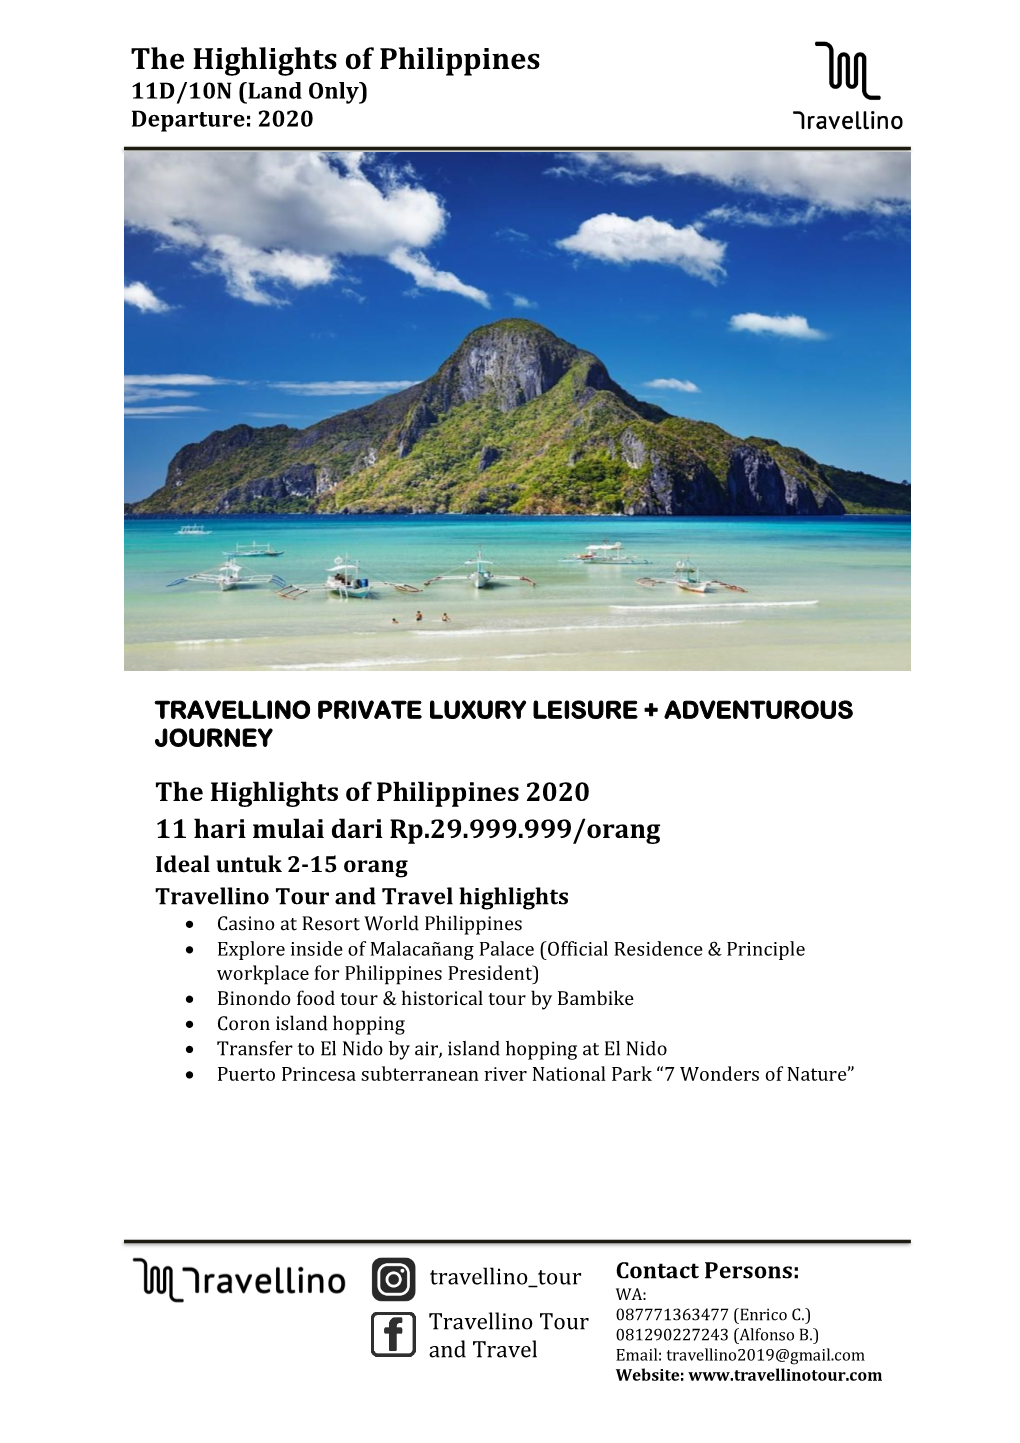 The Highlights of Philippines 11D/10N (Land Only) Departure: 2020